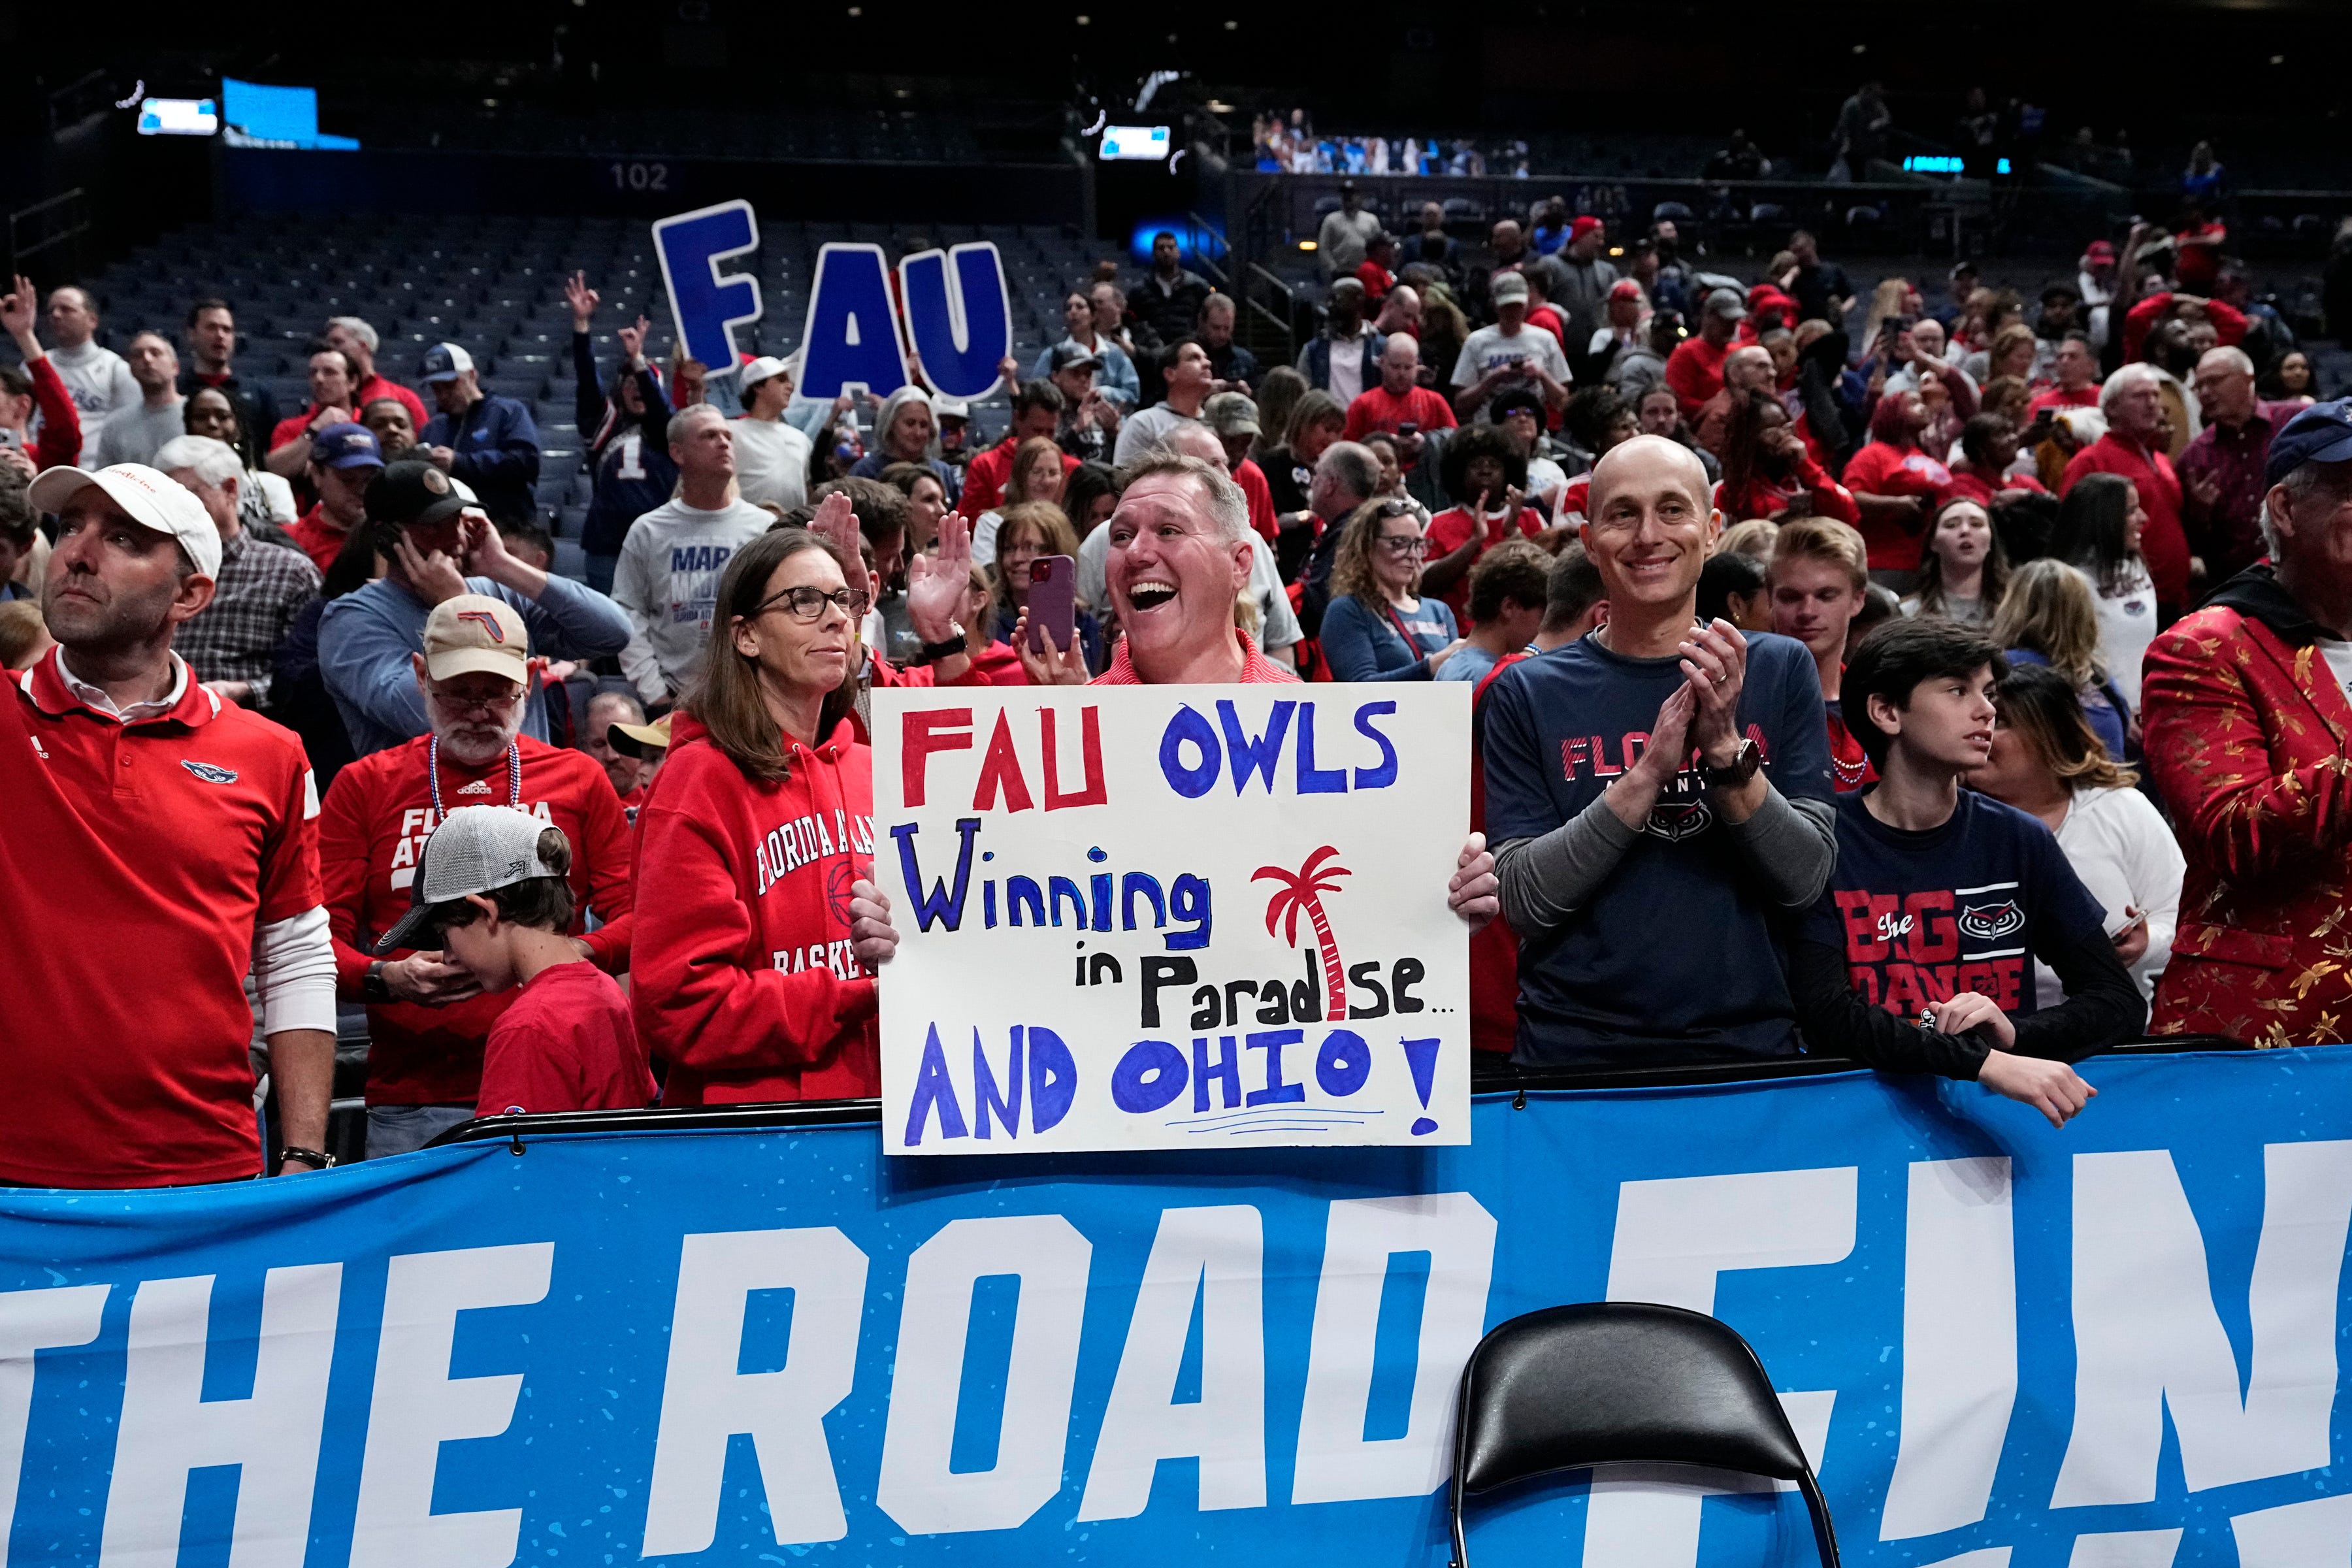 Florida Atlantic Owls fans cheer as their team leaves the court following the 78-70 win over the Fairleigh Dickinson Knights during the second round of the NCAA men s basketball tournament at Nationwide Arena.